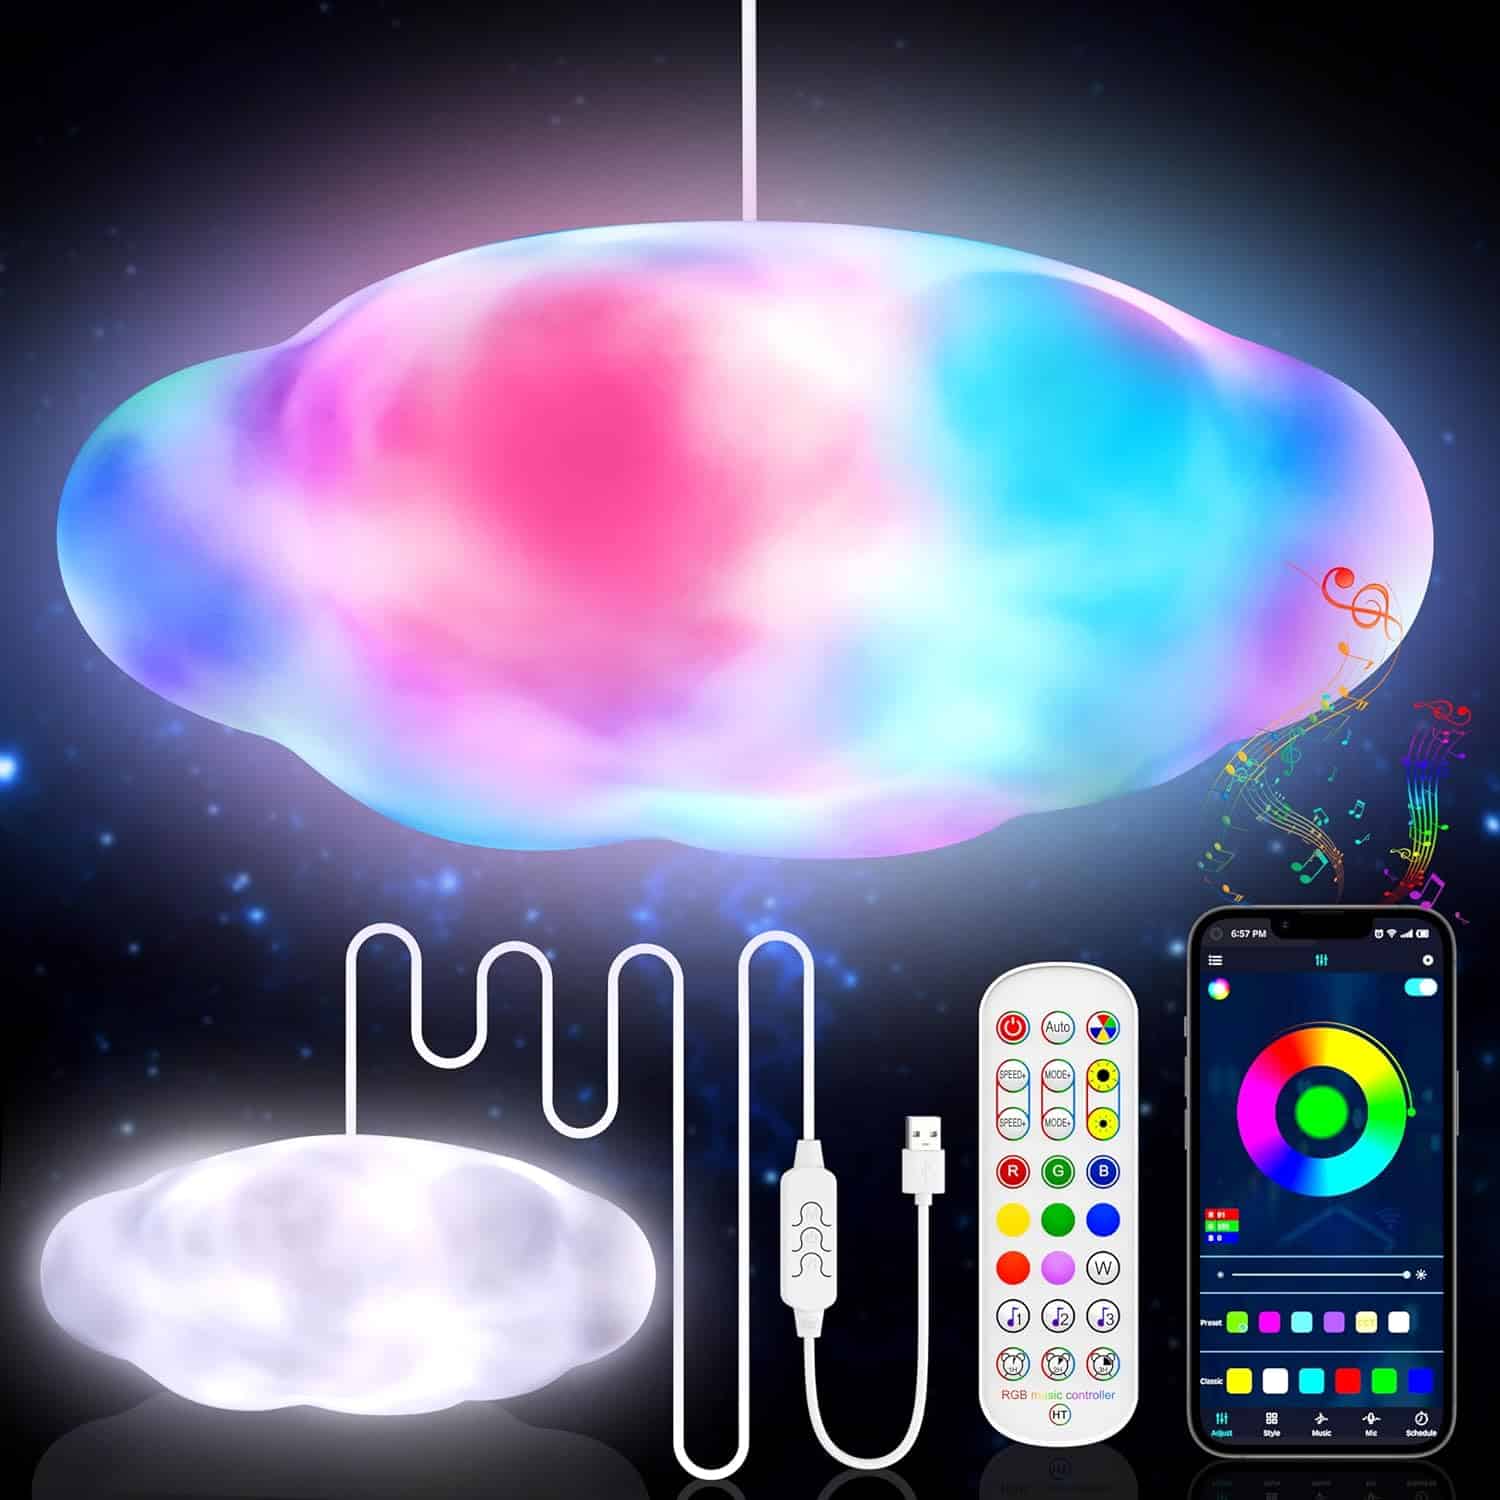 LED Cloud Lights for Ceiling, Multicolor Music Sync Cloud Lamp, 3D Lightning RGB Cloud LED Lights for Bedroom Gaming Room Wall Party Wedding Indoor Outdoor Decor, APPRemote Control